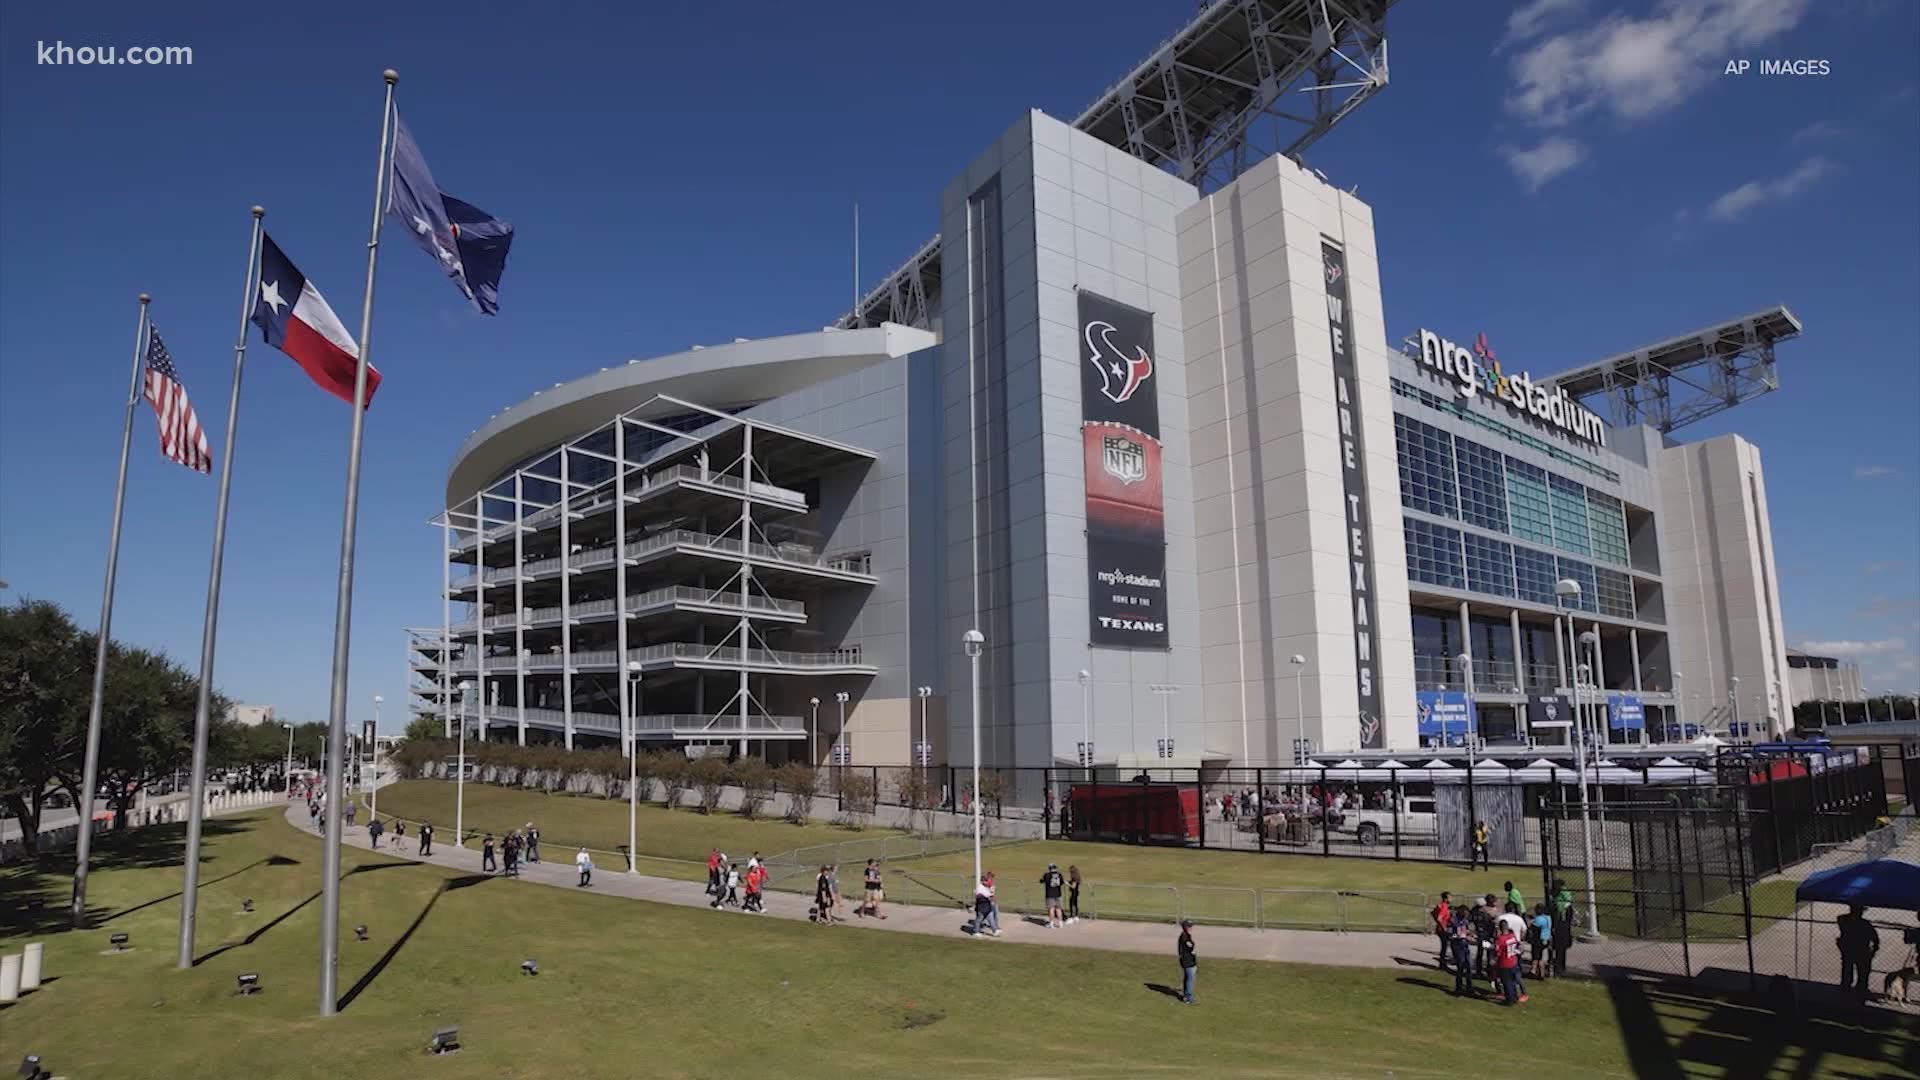 The Houston Texans will not host fans for its first home game of the season, the team announced Friday.